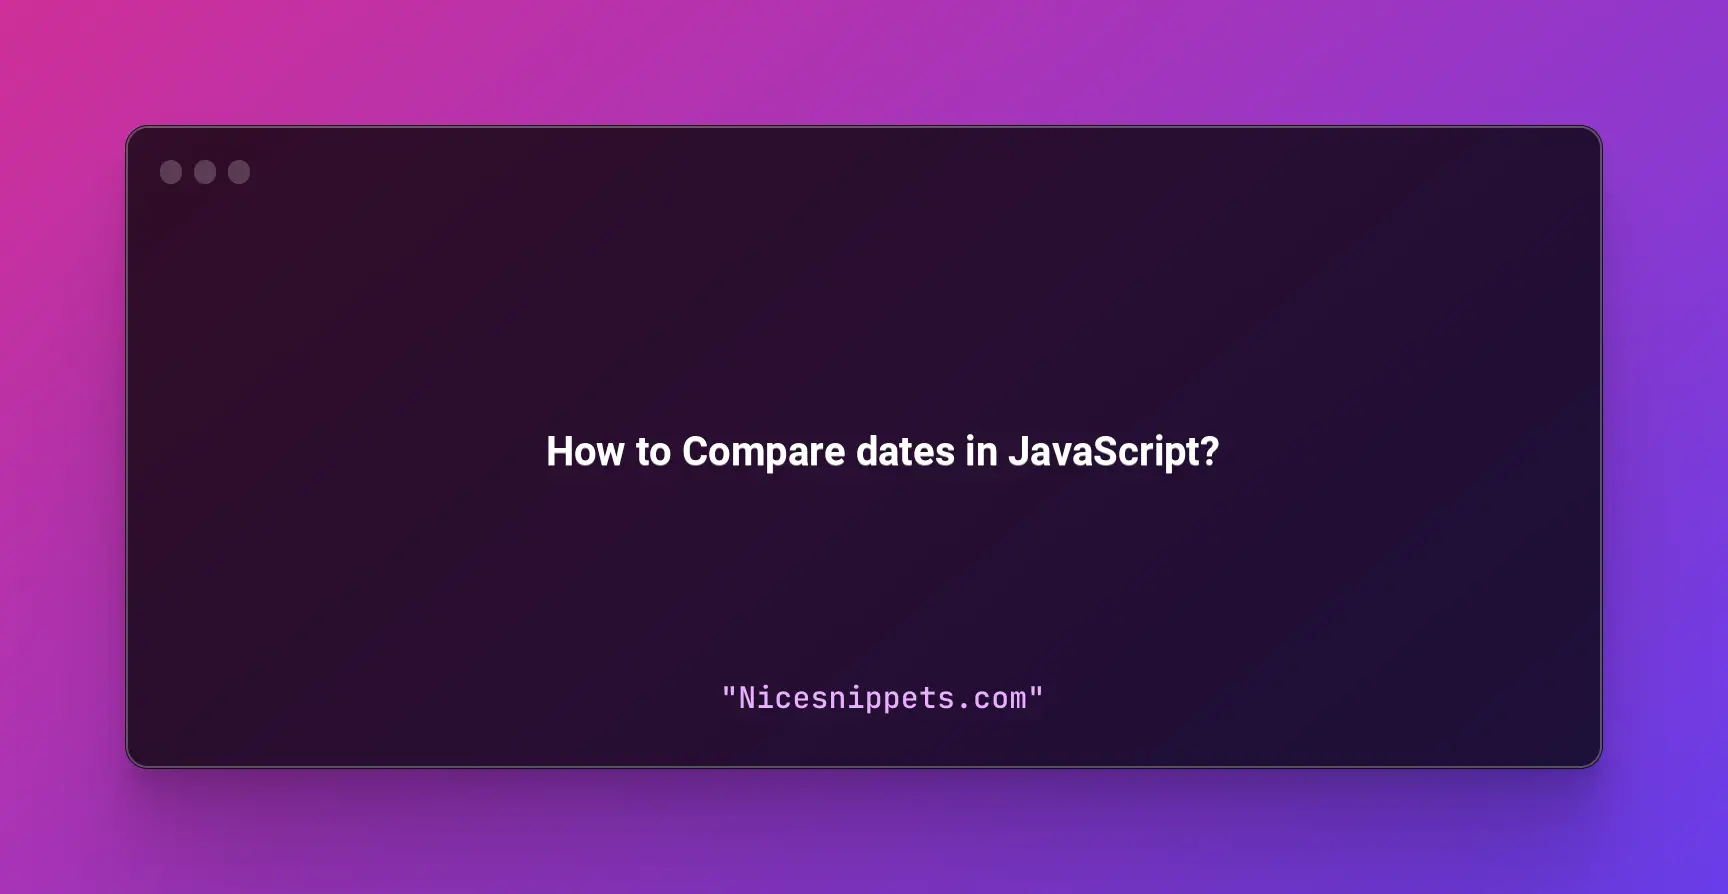 How to Compare dates in JavaScript?